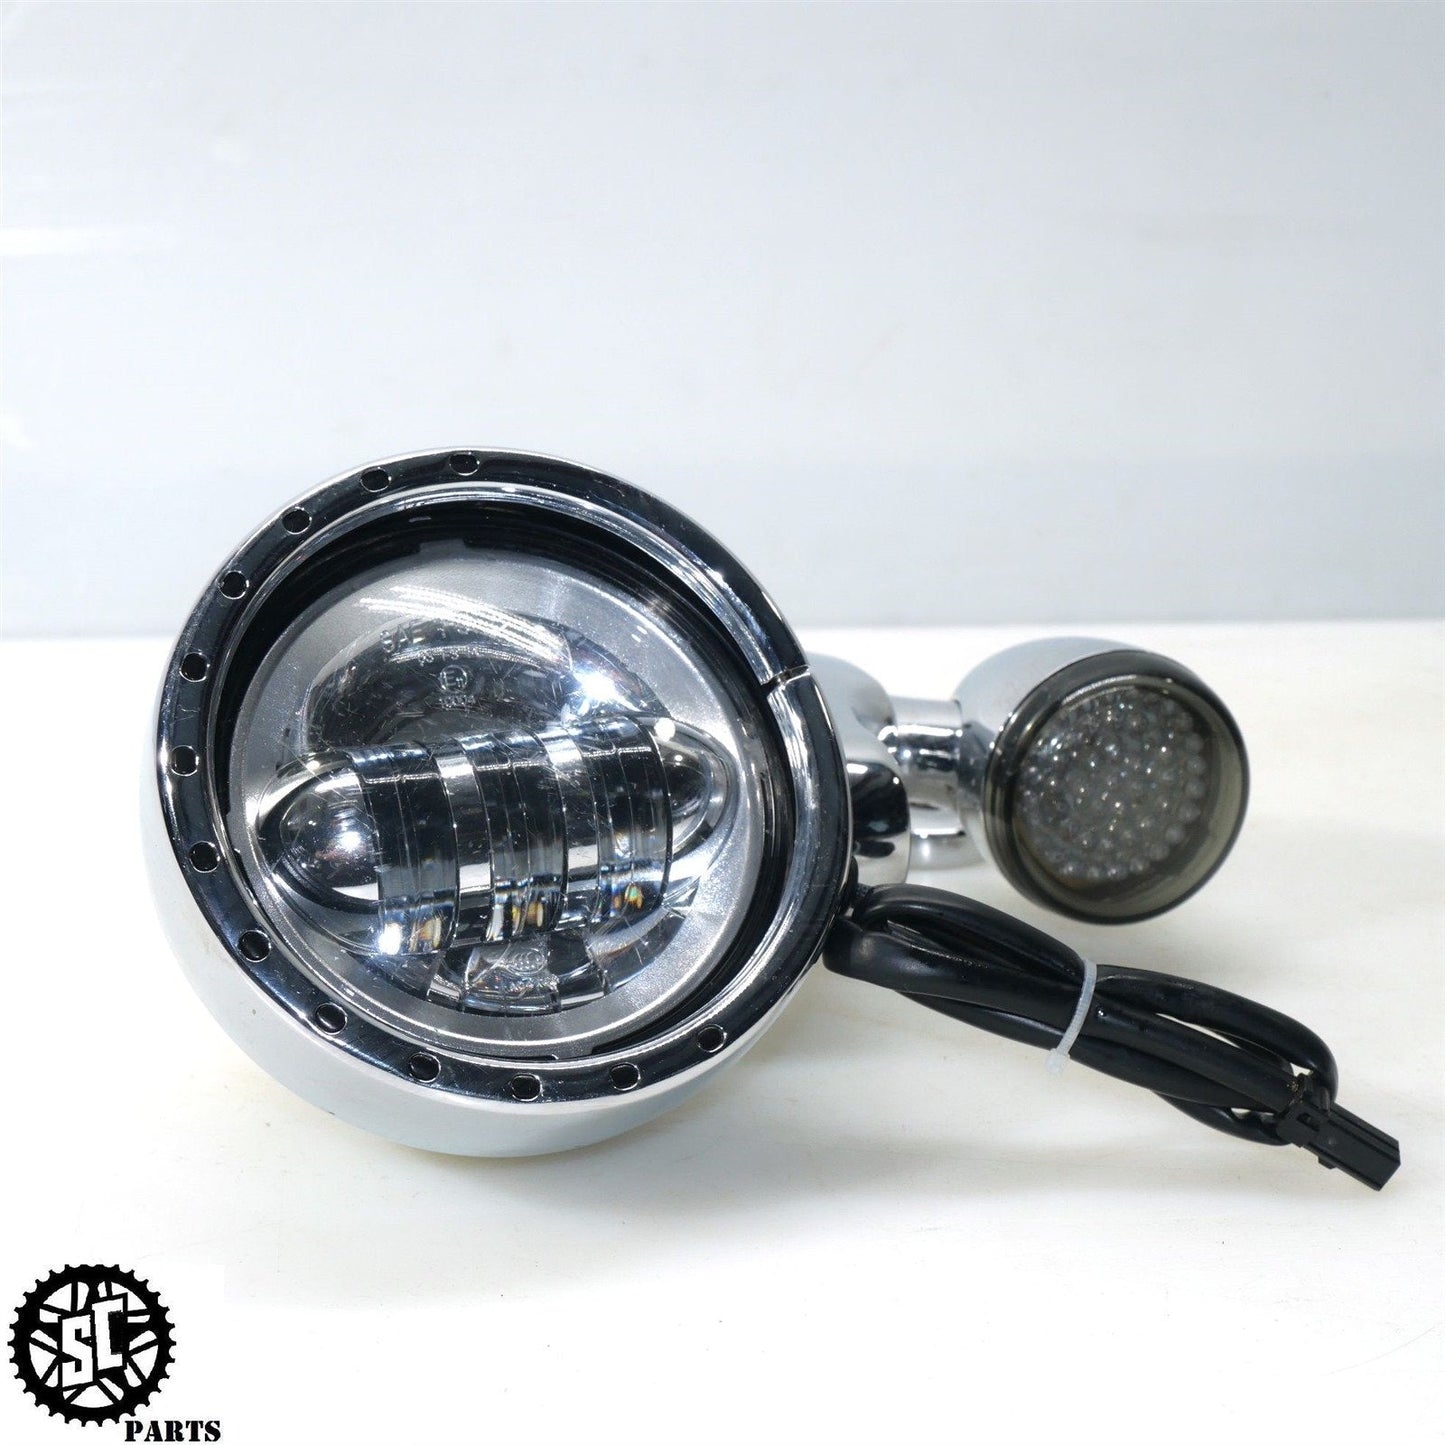 2014 HARLEY ULTRA LIMITED DAY MAKER FOG LIGHT AUXILIARY FRONT LED 68000173 HD50